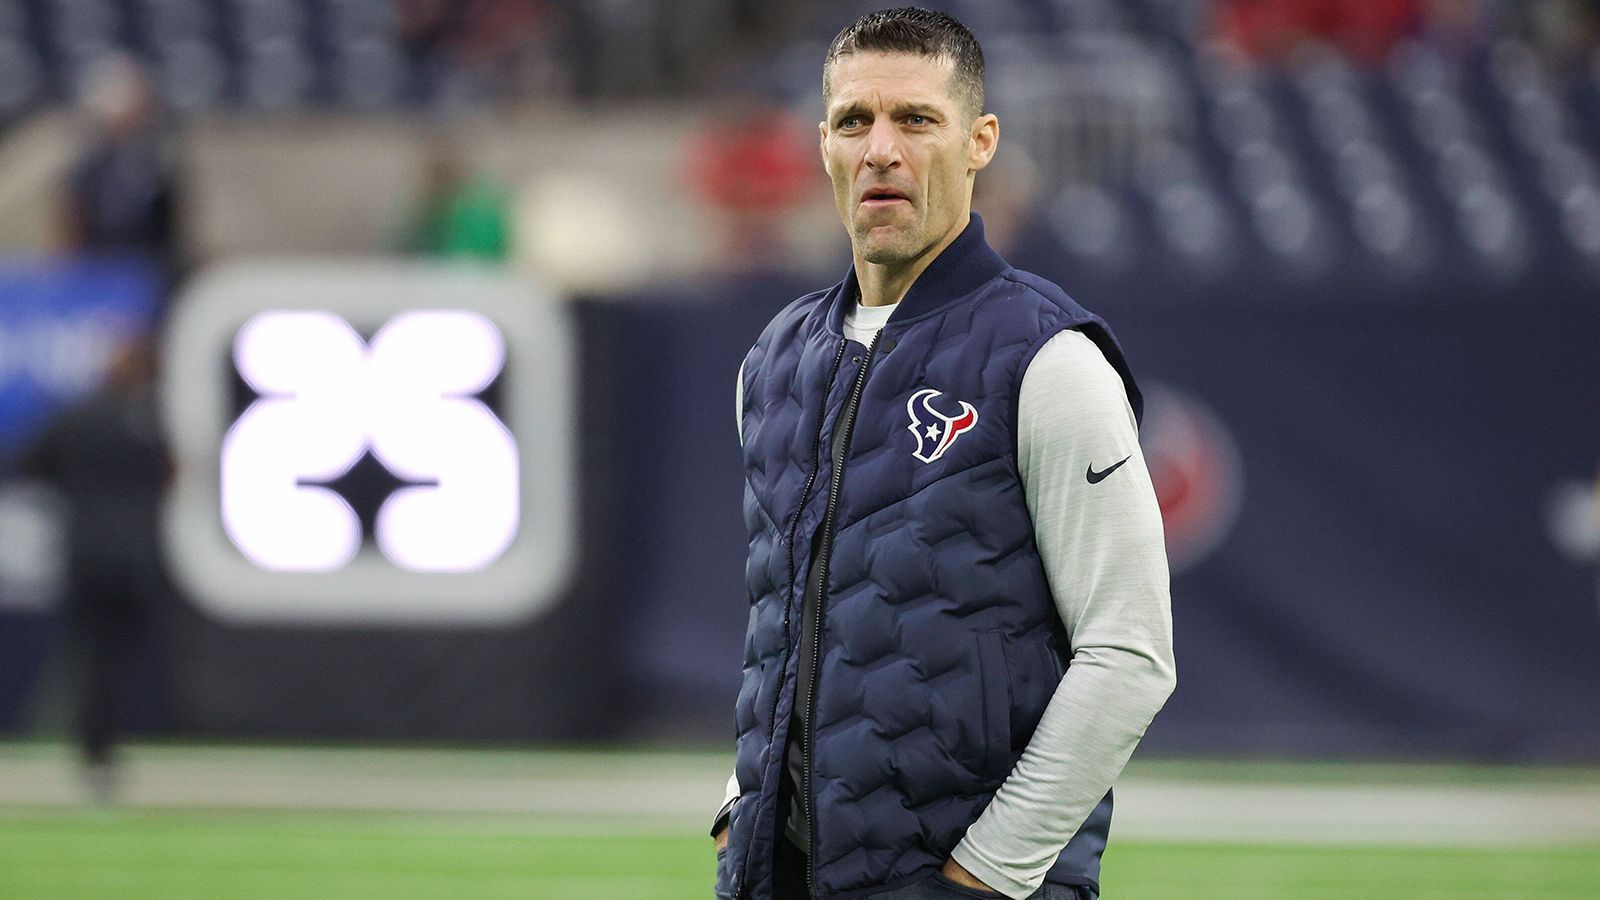 
                <strong>Houston Texans</strong><br>
                &#x2022; Head Coach: DeMeco Ryans <br>&#x2022; Offensive Coordinator: Bobby Slowik <br>&#x2022; Defensive Coordinator: Matt Burke<br>&#x2022; Special Teams Coordinator: Frank Ross <br>&#x2022; General Manager: Nick Caserio (im Bild)<br>
              